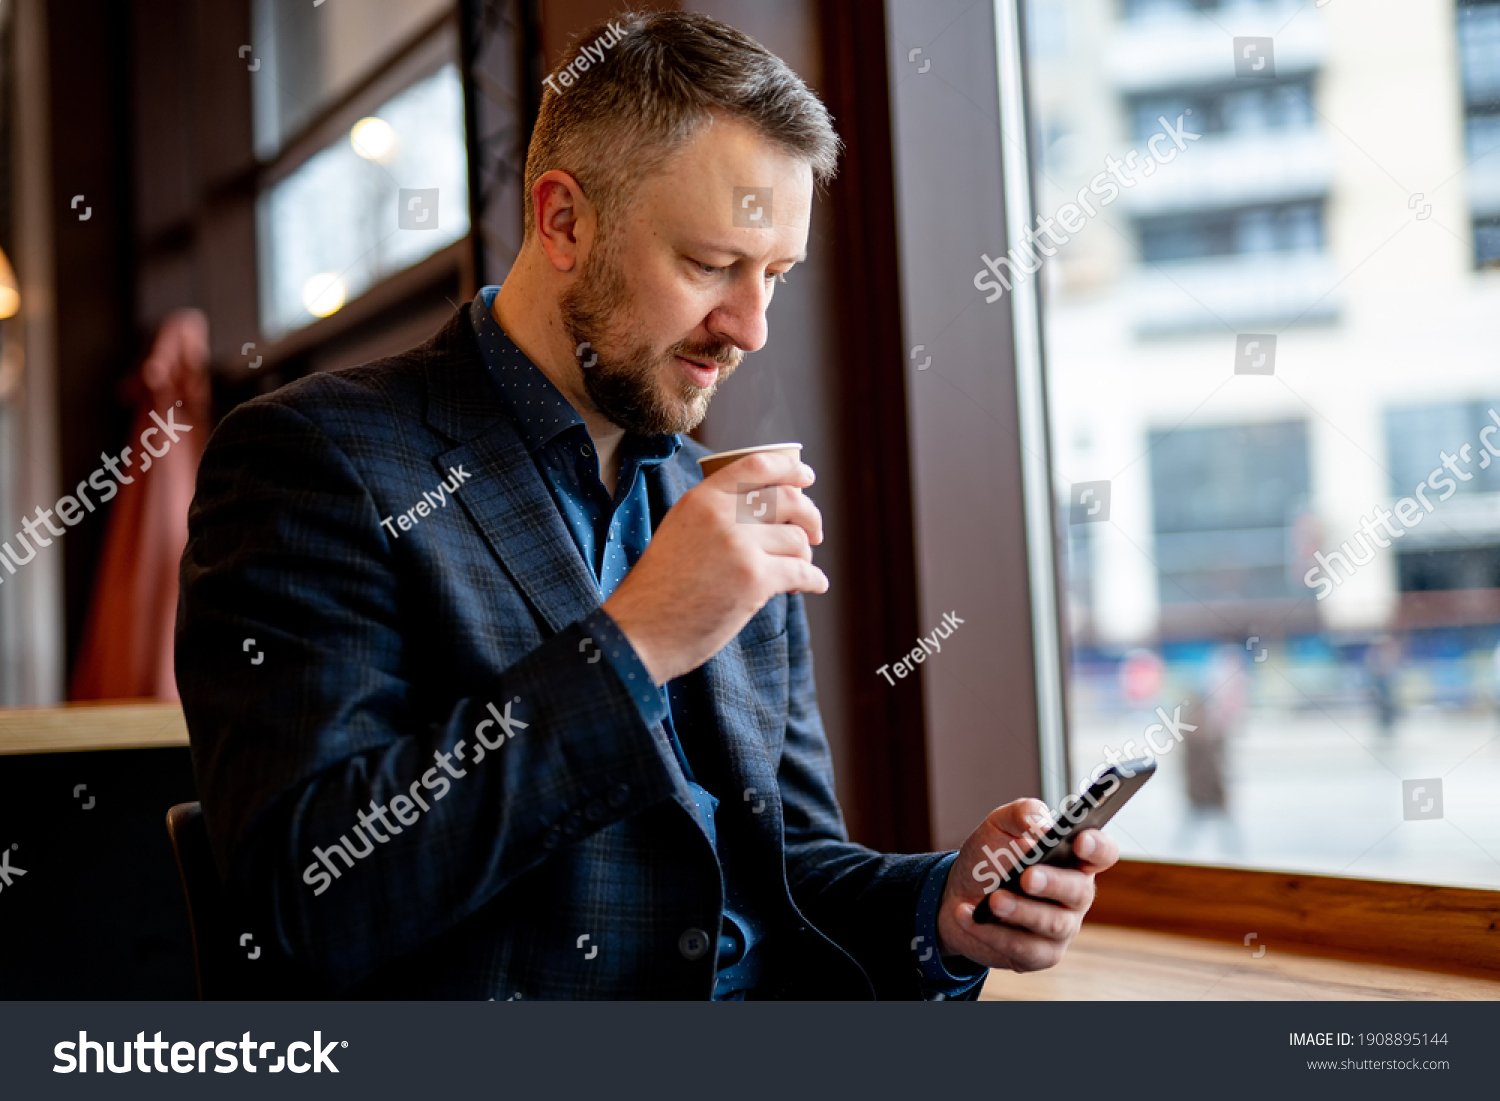 Authentic image of a pensive businessman in a coffee shop. Businessman in dark suit having break surfing internet on the phone. #1908895144